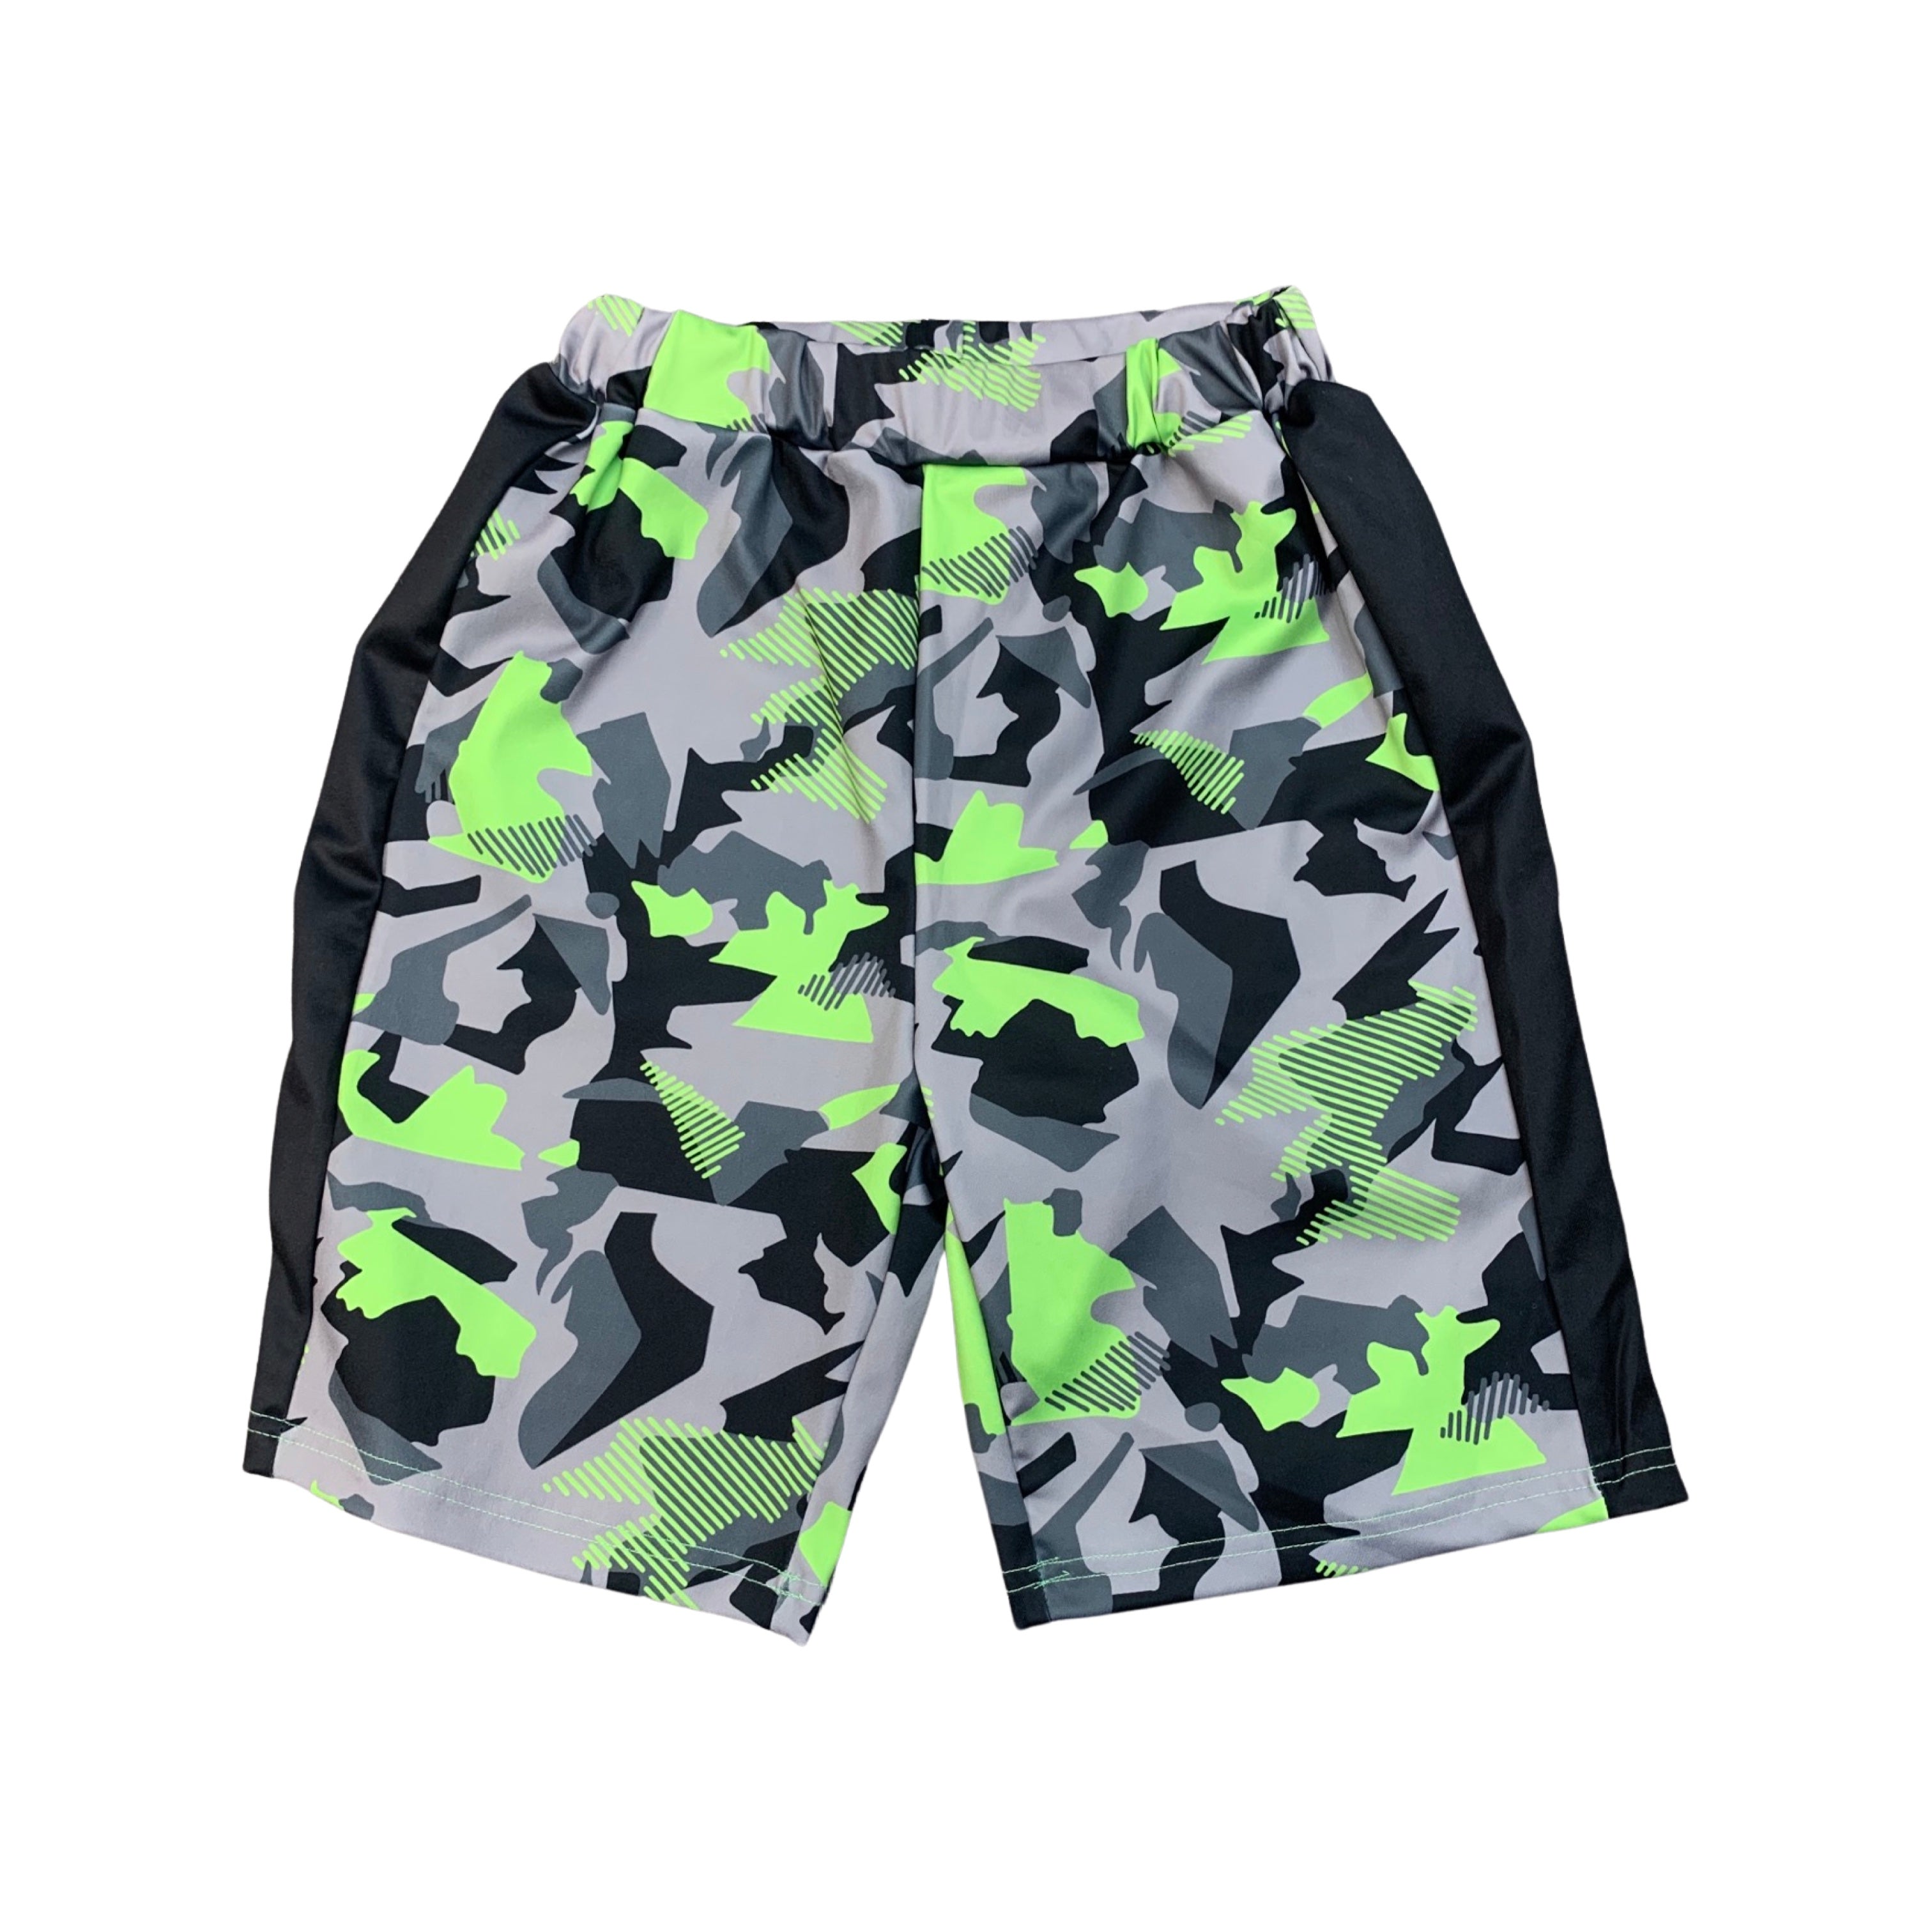 Shein Patterned Shorts Boys 10 Years